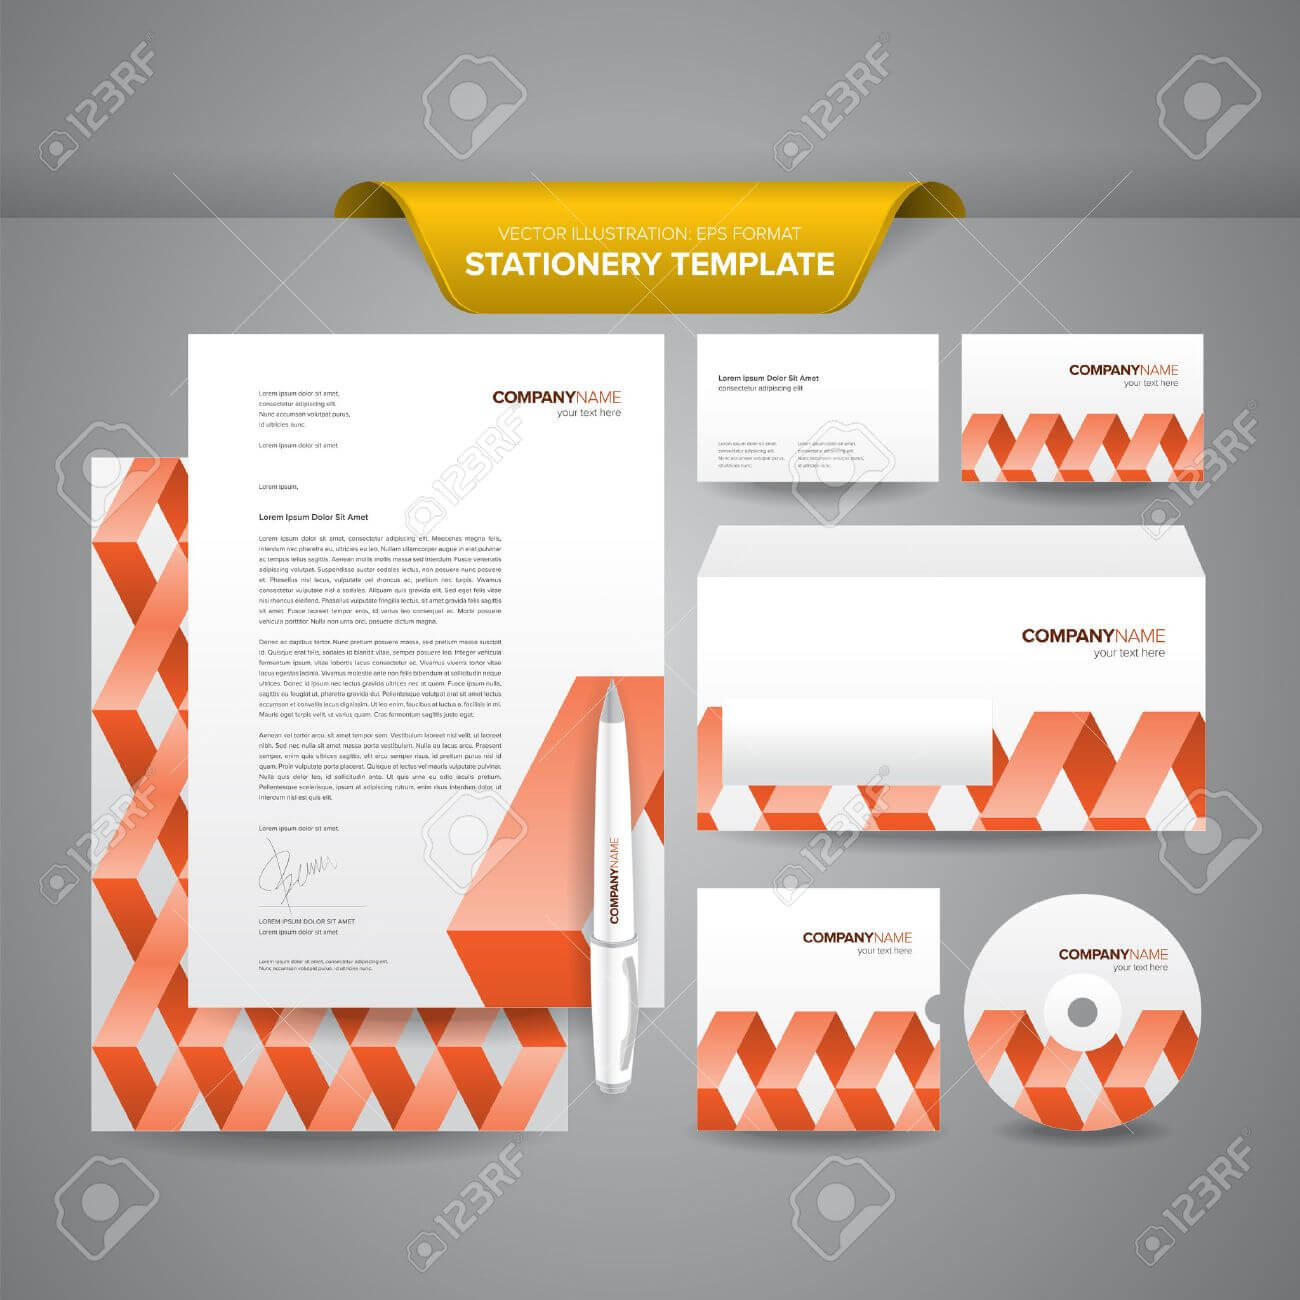 Complete Set Of Business Stationery Templates Such As Letterhead,.. For Business Card Letterhead Envelope Template